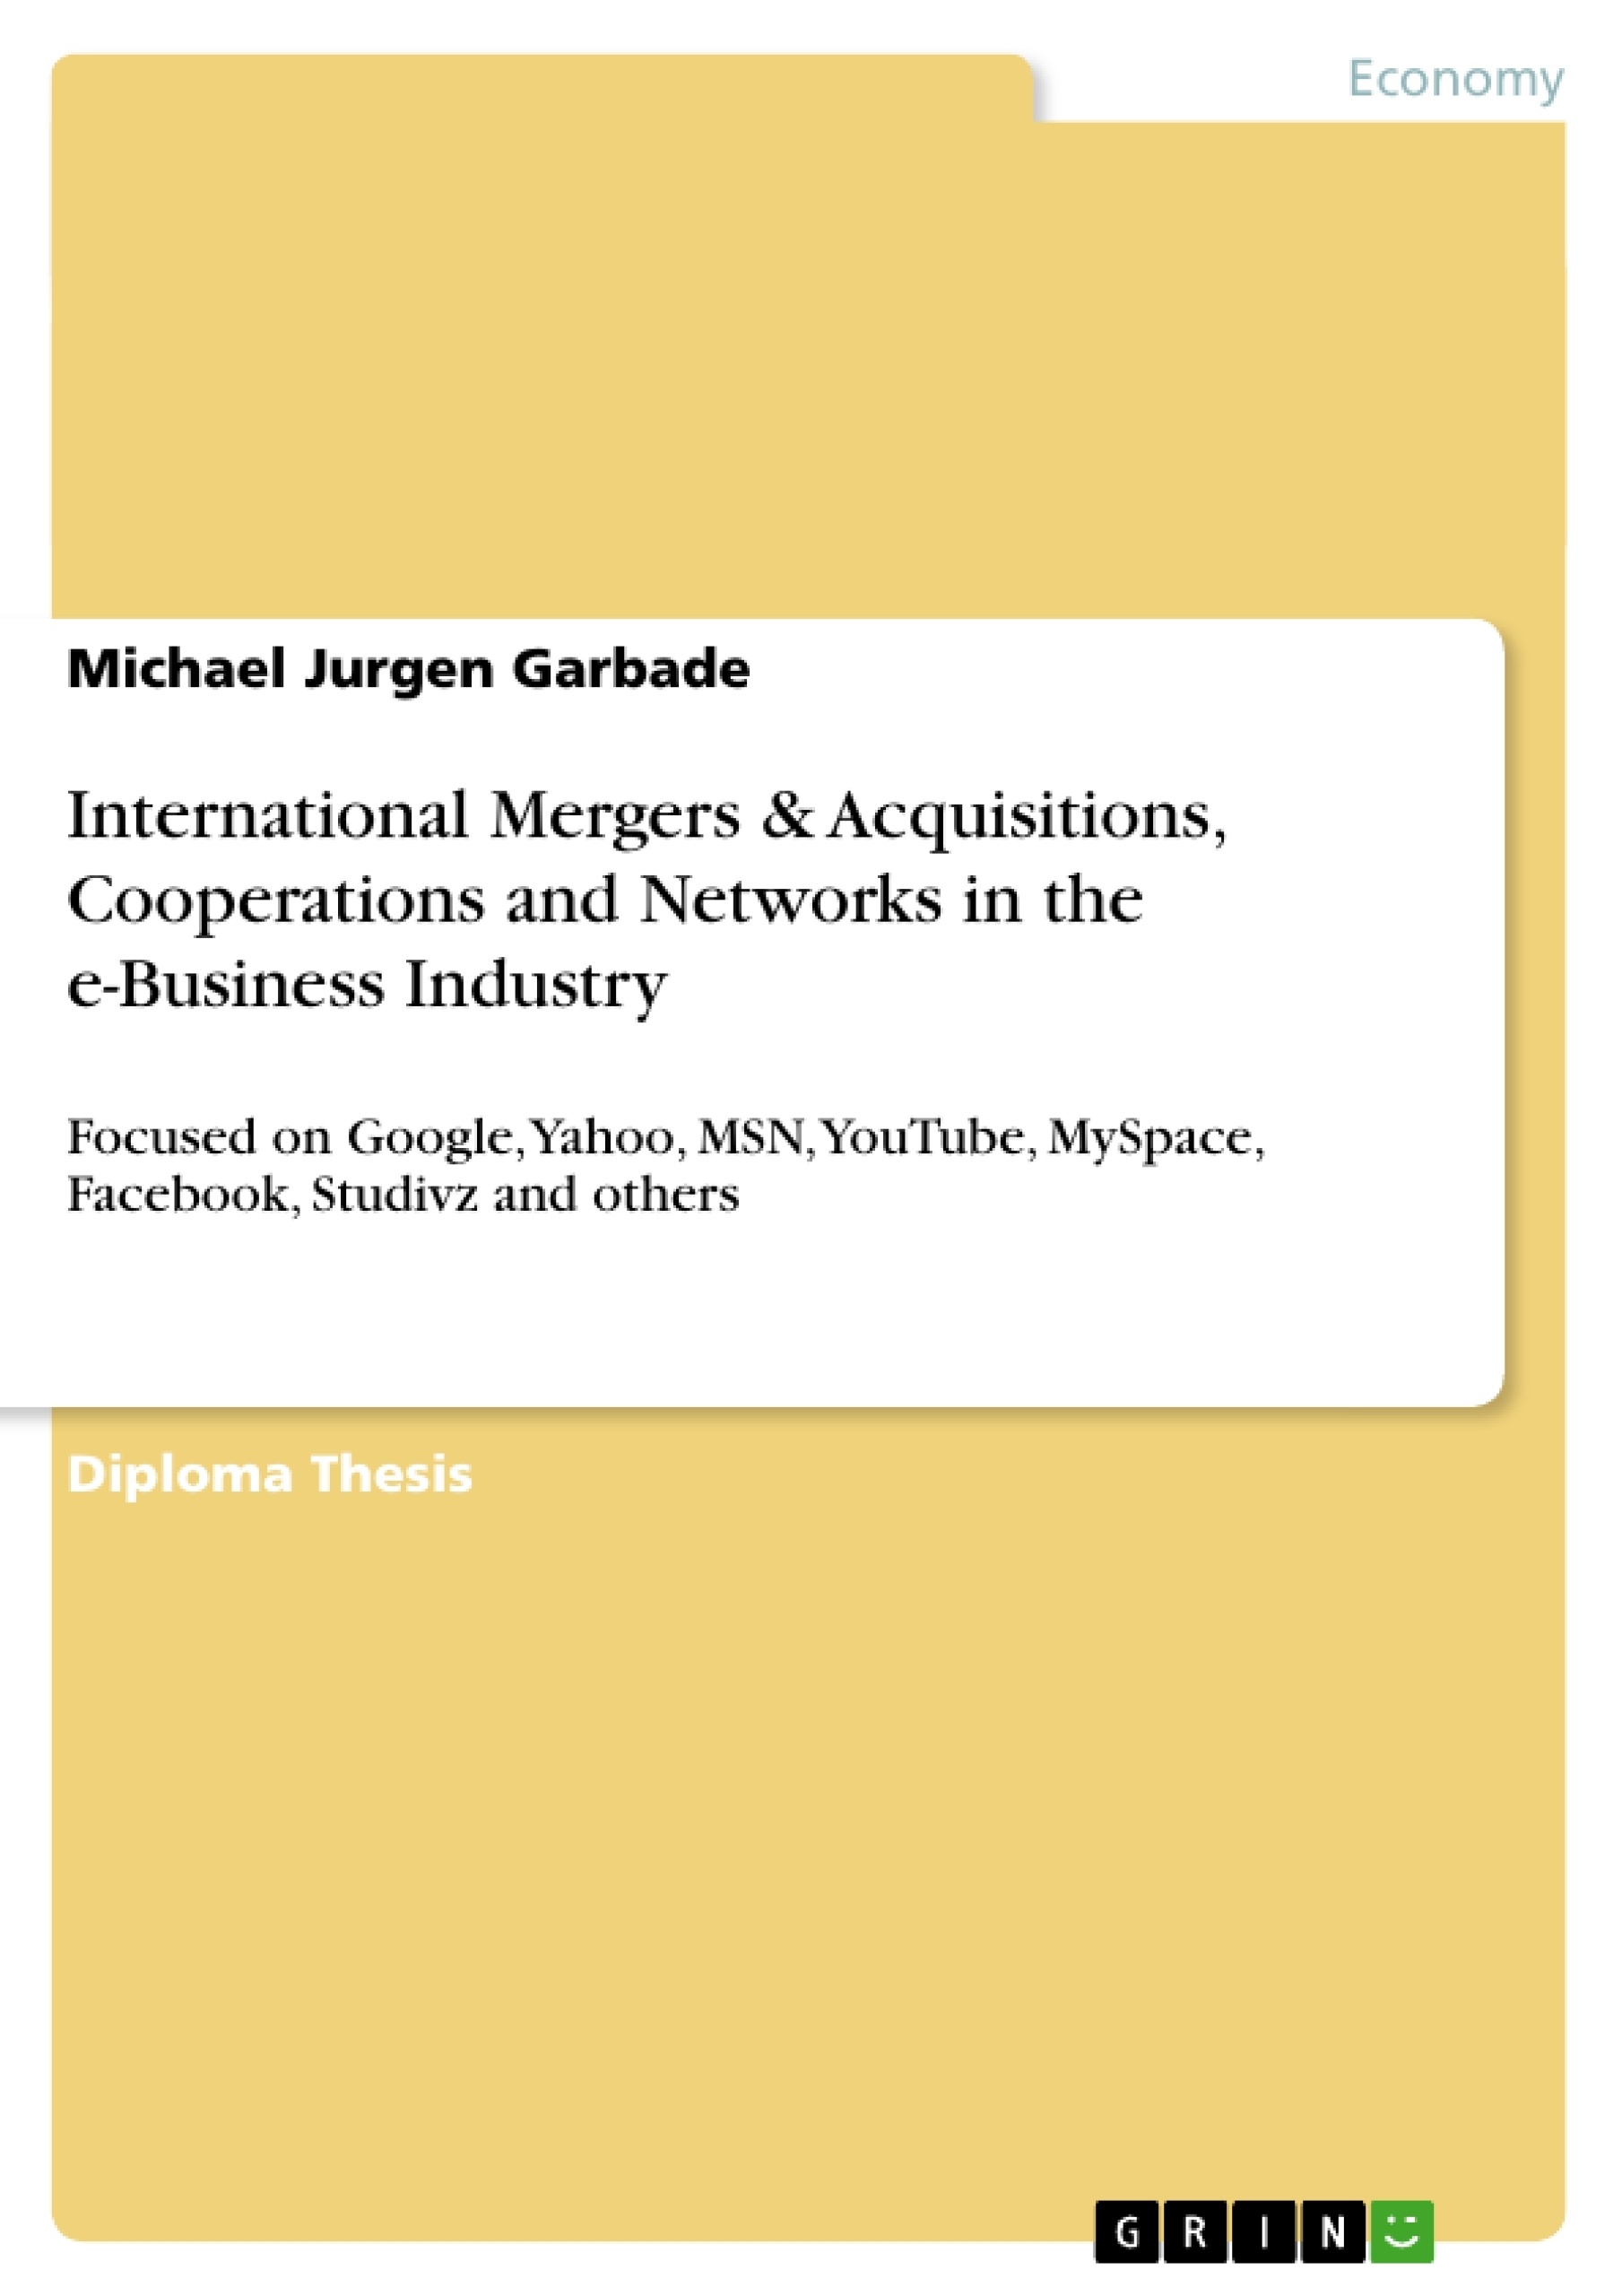 Titre: International Mergers & Acquisitions, Cooperations and Networks in the e-Business Industry 